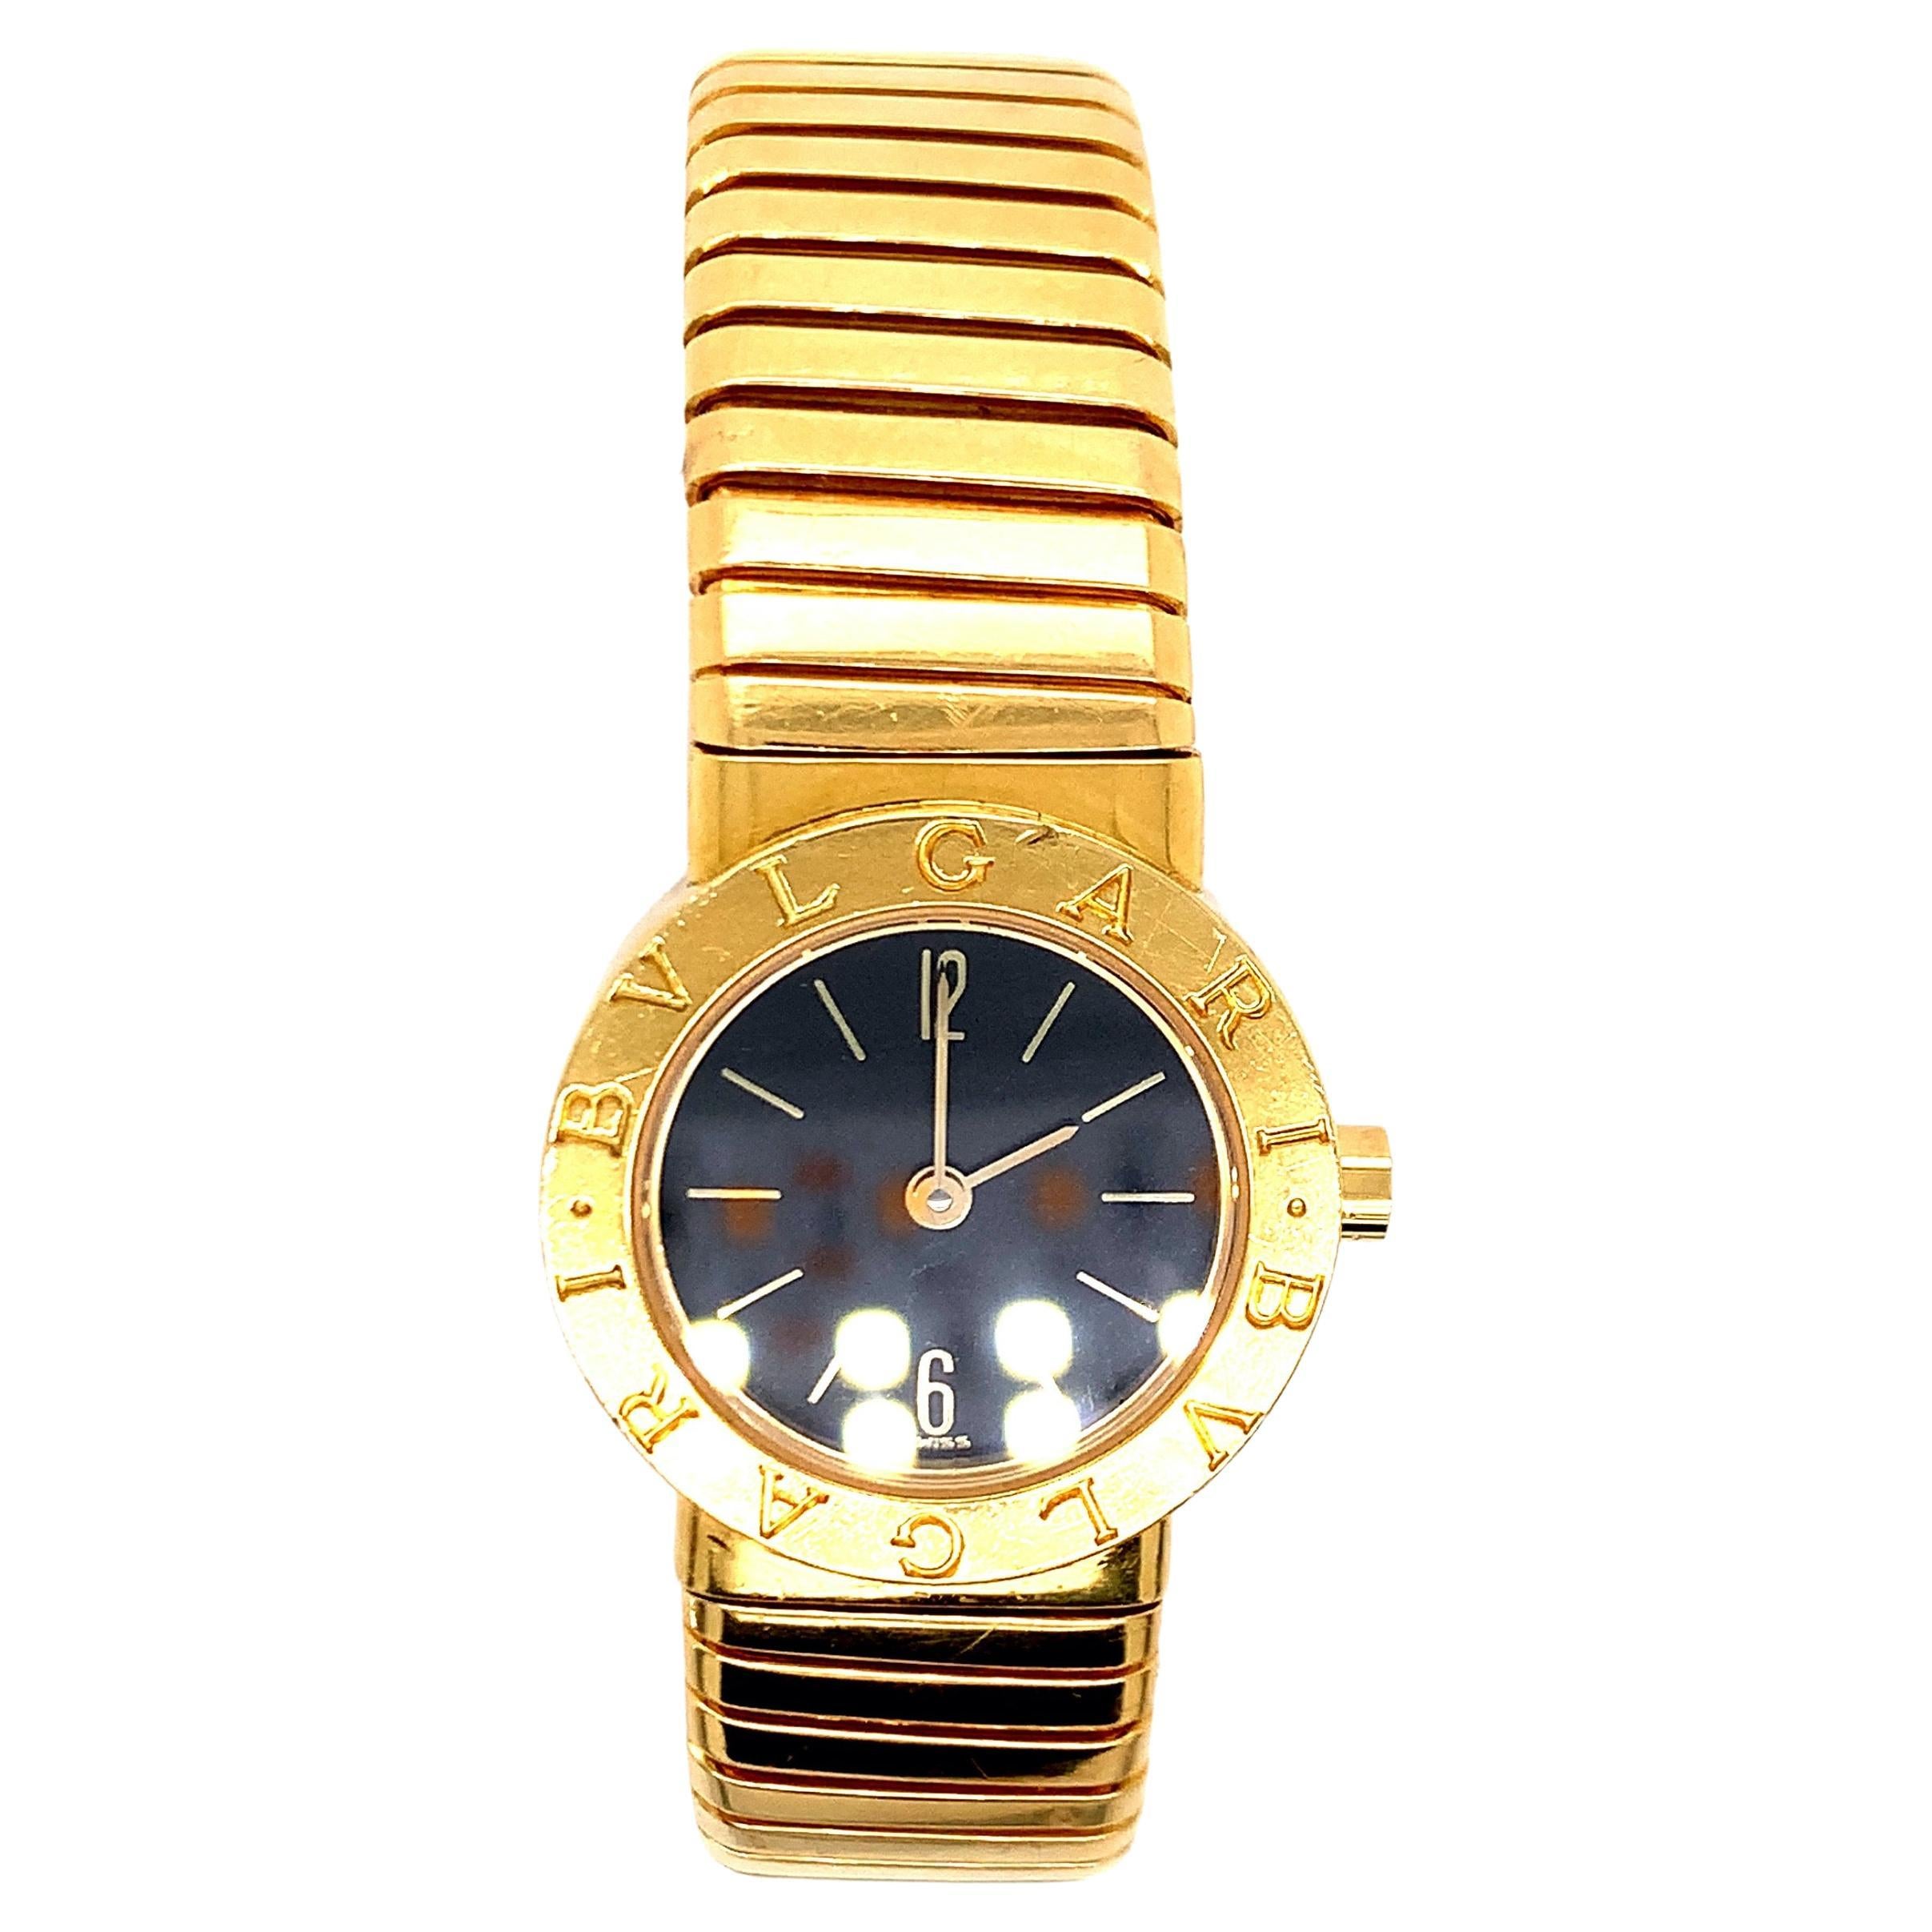 An 18 karat gold ‘Tubogas’ bangle watch created by Bvlgari and made in Switzerland. The open-ended bracelet has a round black dial at its center, with baton chapters and Arabic numerals at twelve and six. The movement is quartz. 

Serial no. BB 23